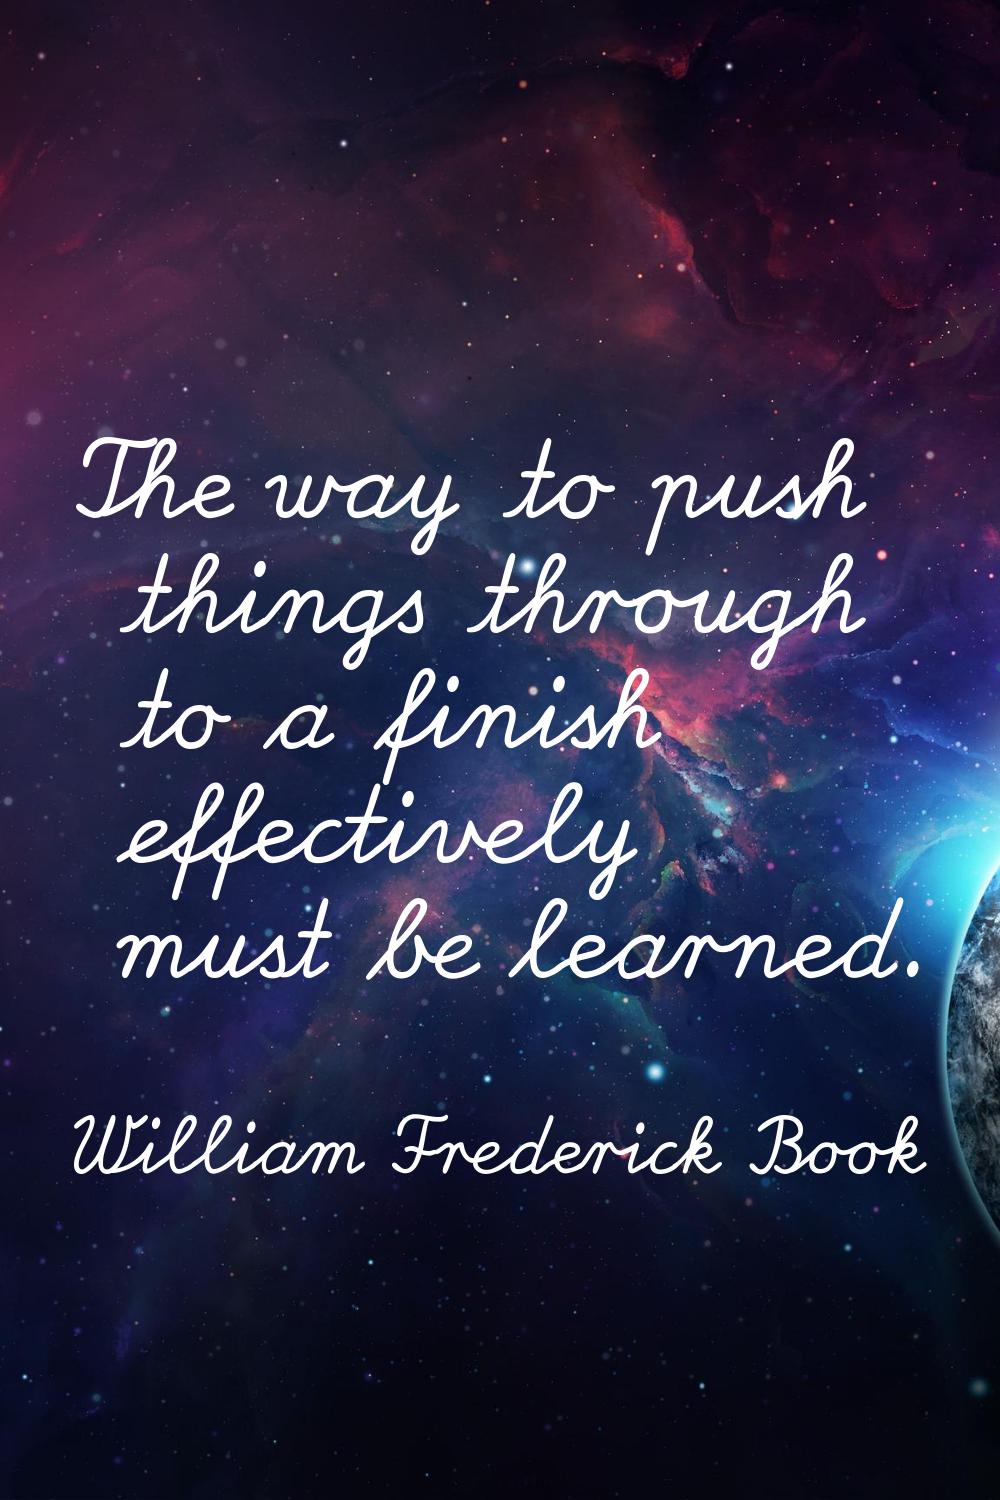 The way to push things through to a finish effectively must be learned.